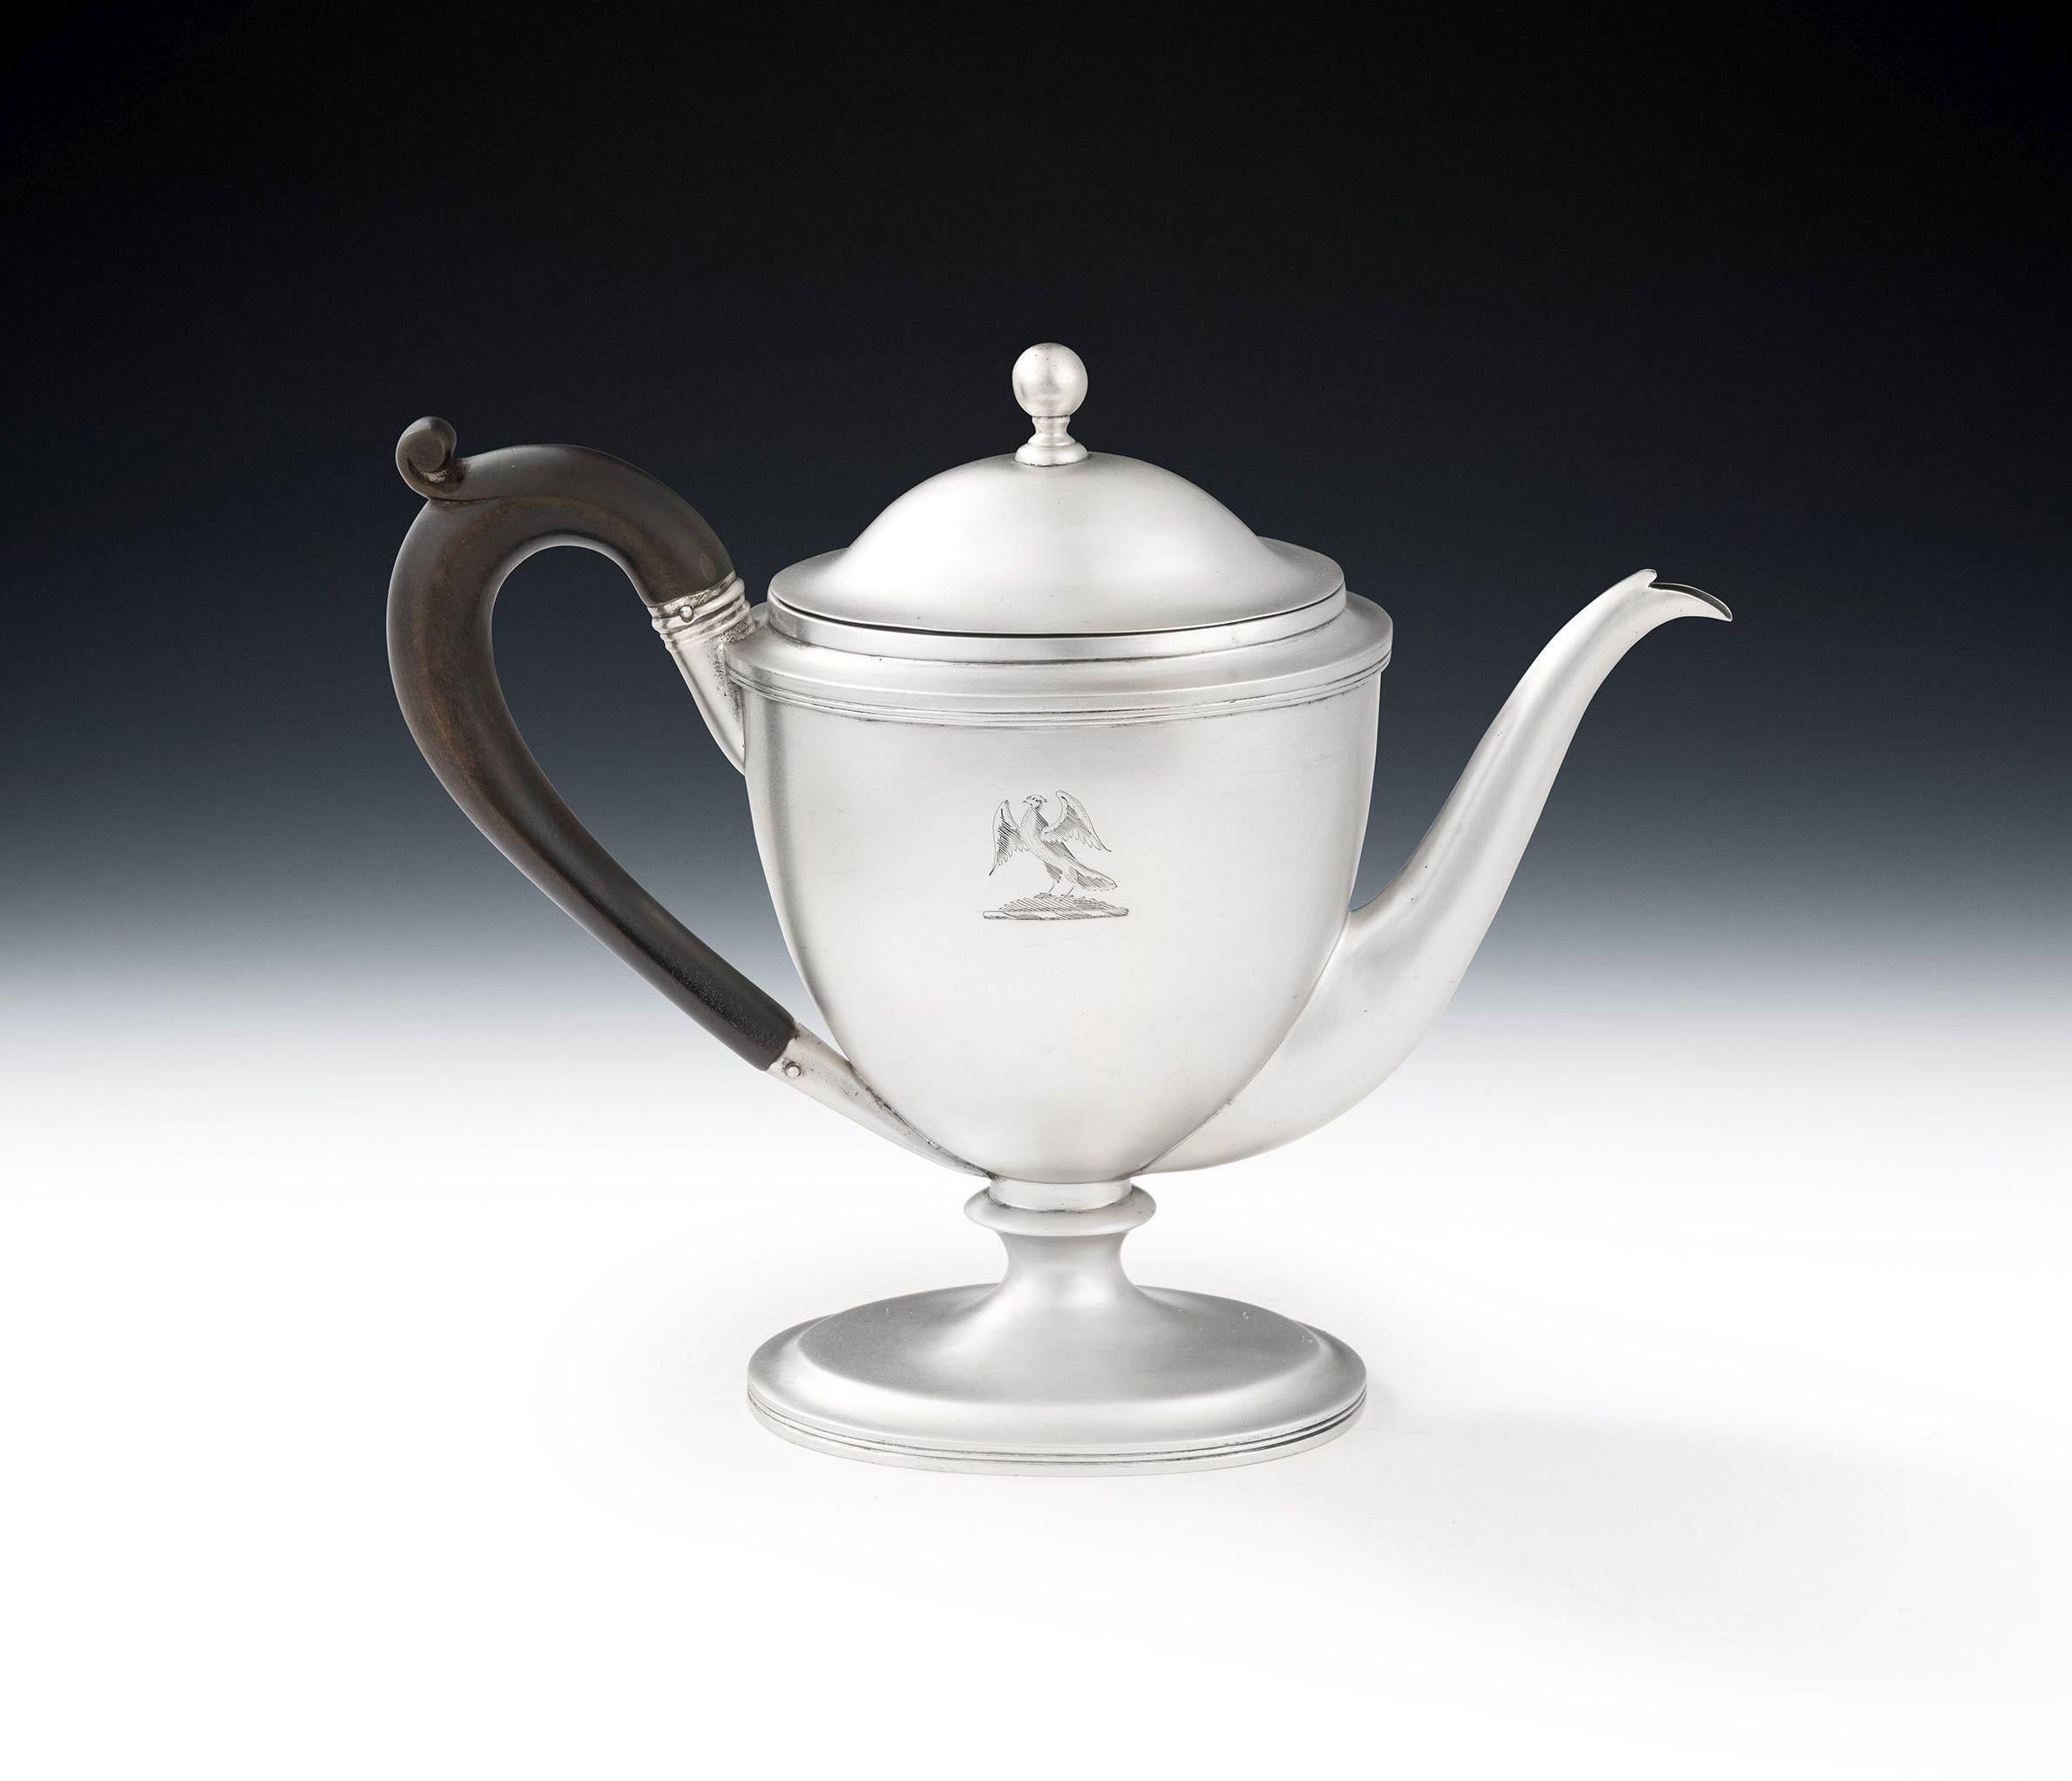 A RARE GEORGE III COMBINATION ARGYLE/BACHELOR TEAPOT MADE IN LONDON IN 1805 BY JOHN EMES.

This piece stands on an oval, stepped, pedestal foot decorated with reeding. The oval vase shaped body rises to a reeded rim and is engraved with a